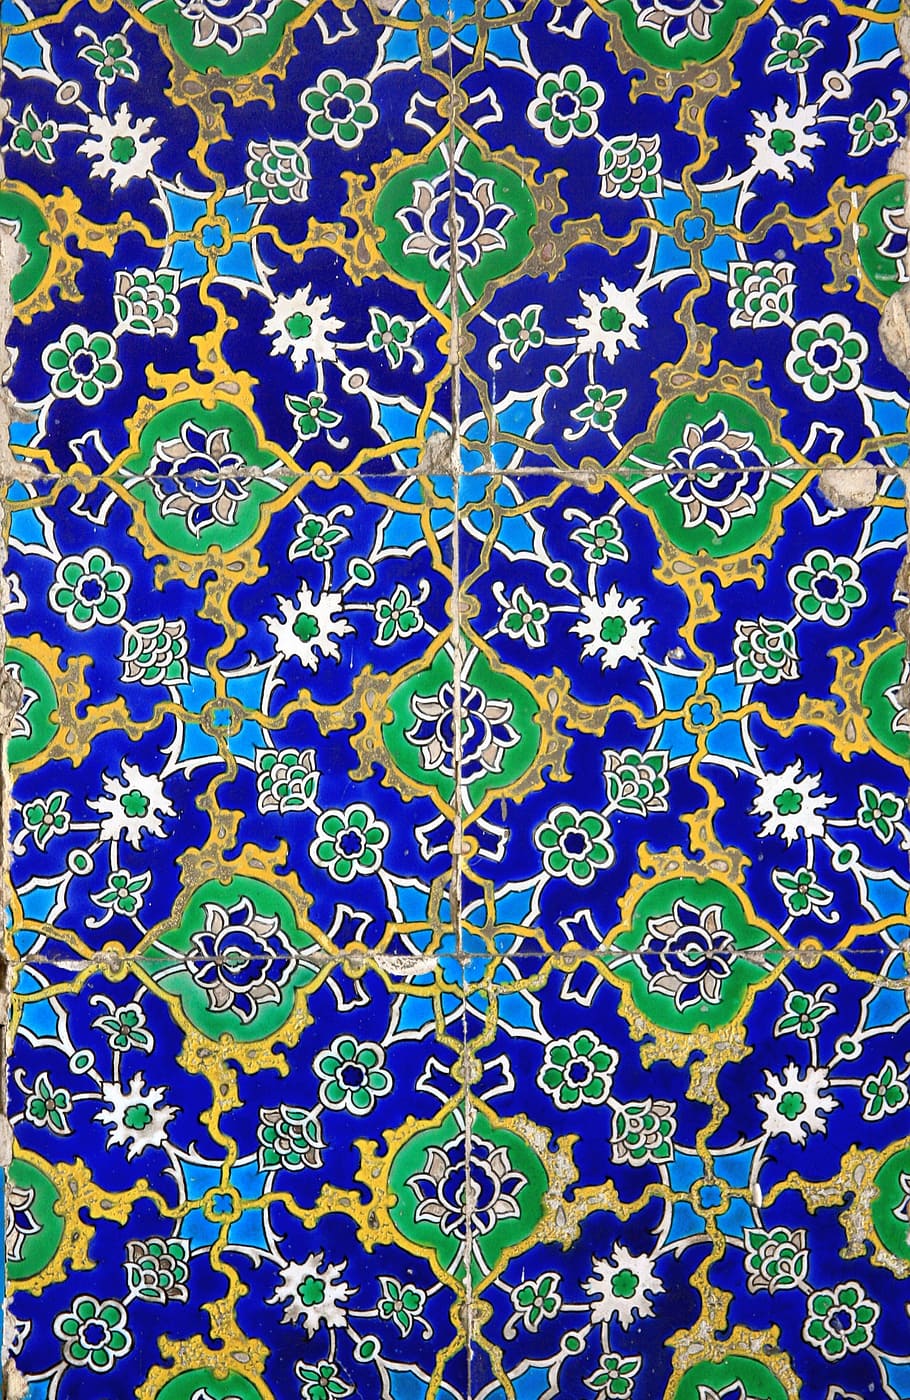 blue, green, white, floral, poster, abstract, arabesque, mosaic, pattern, full frame